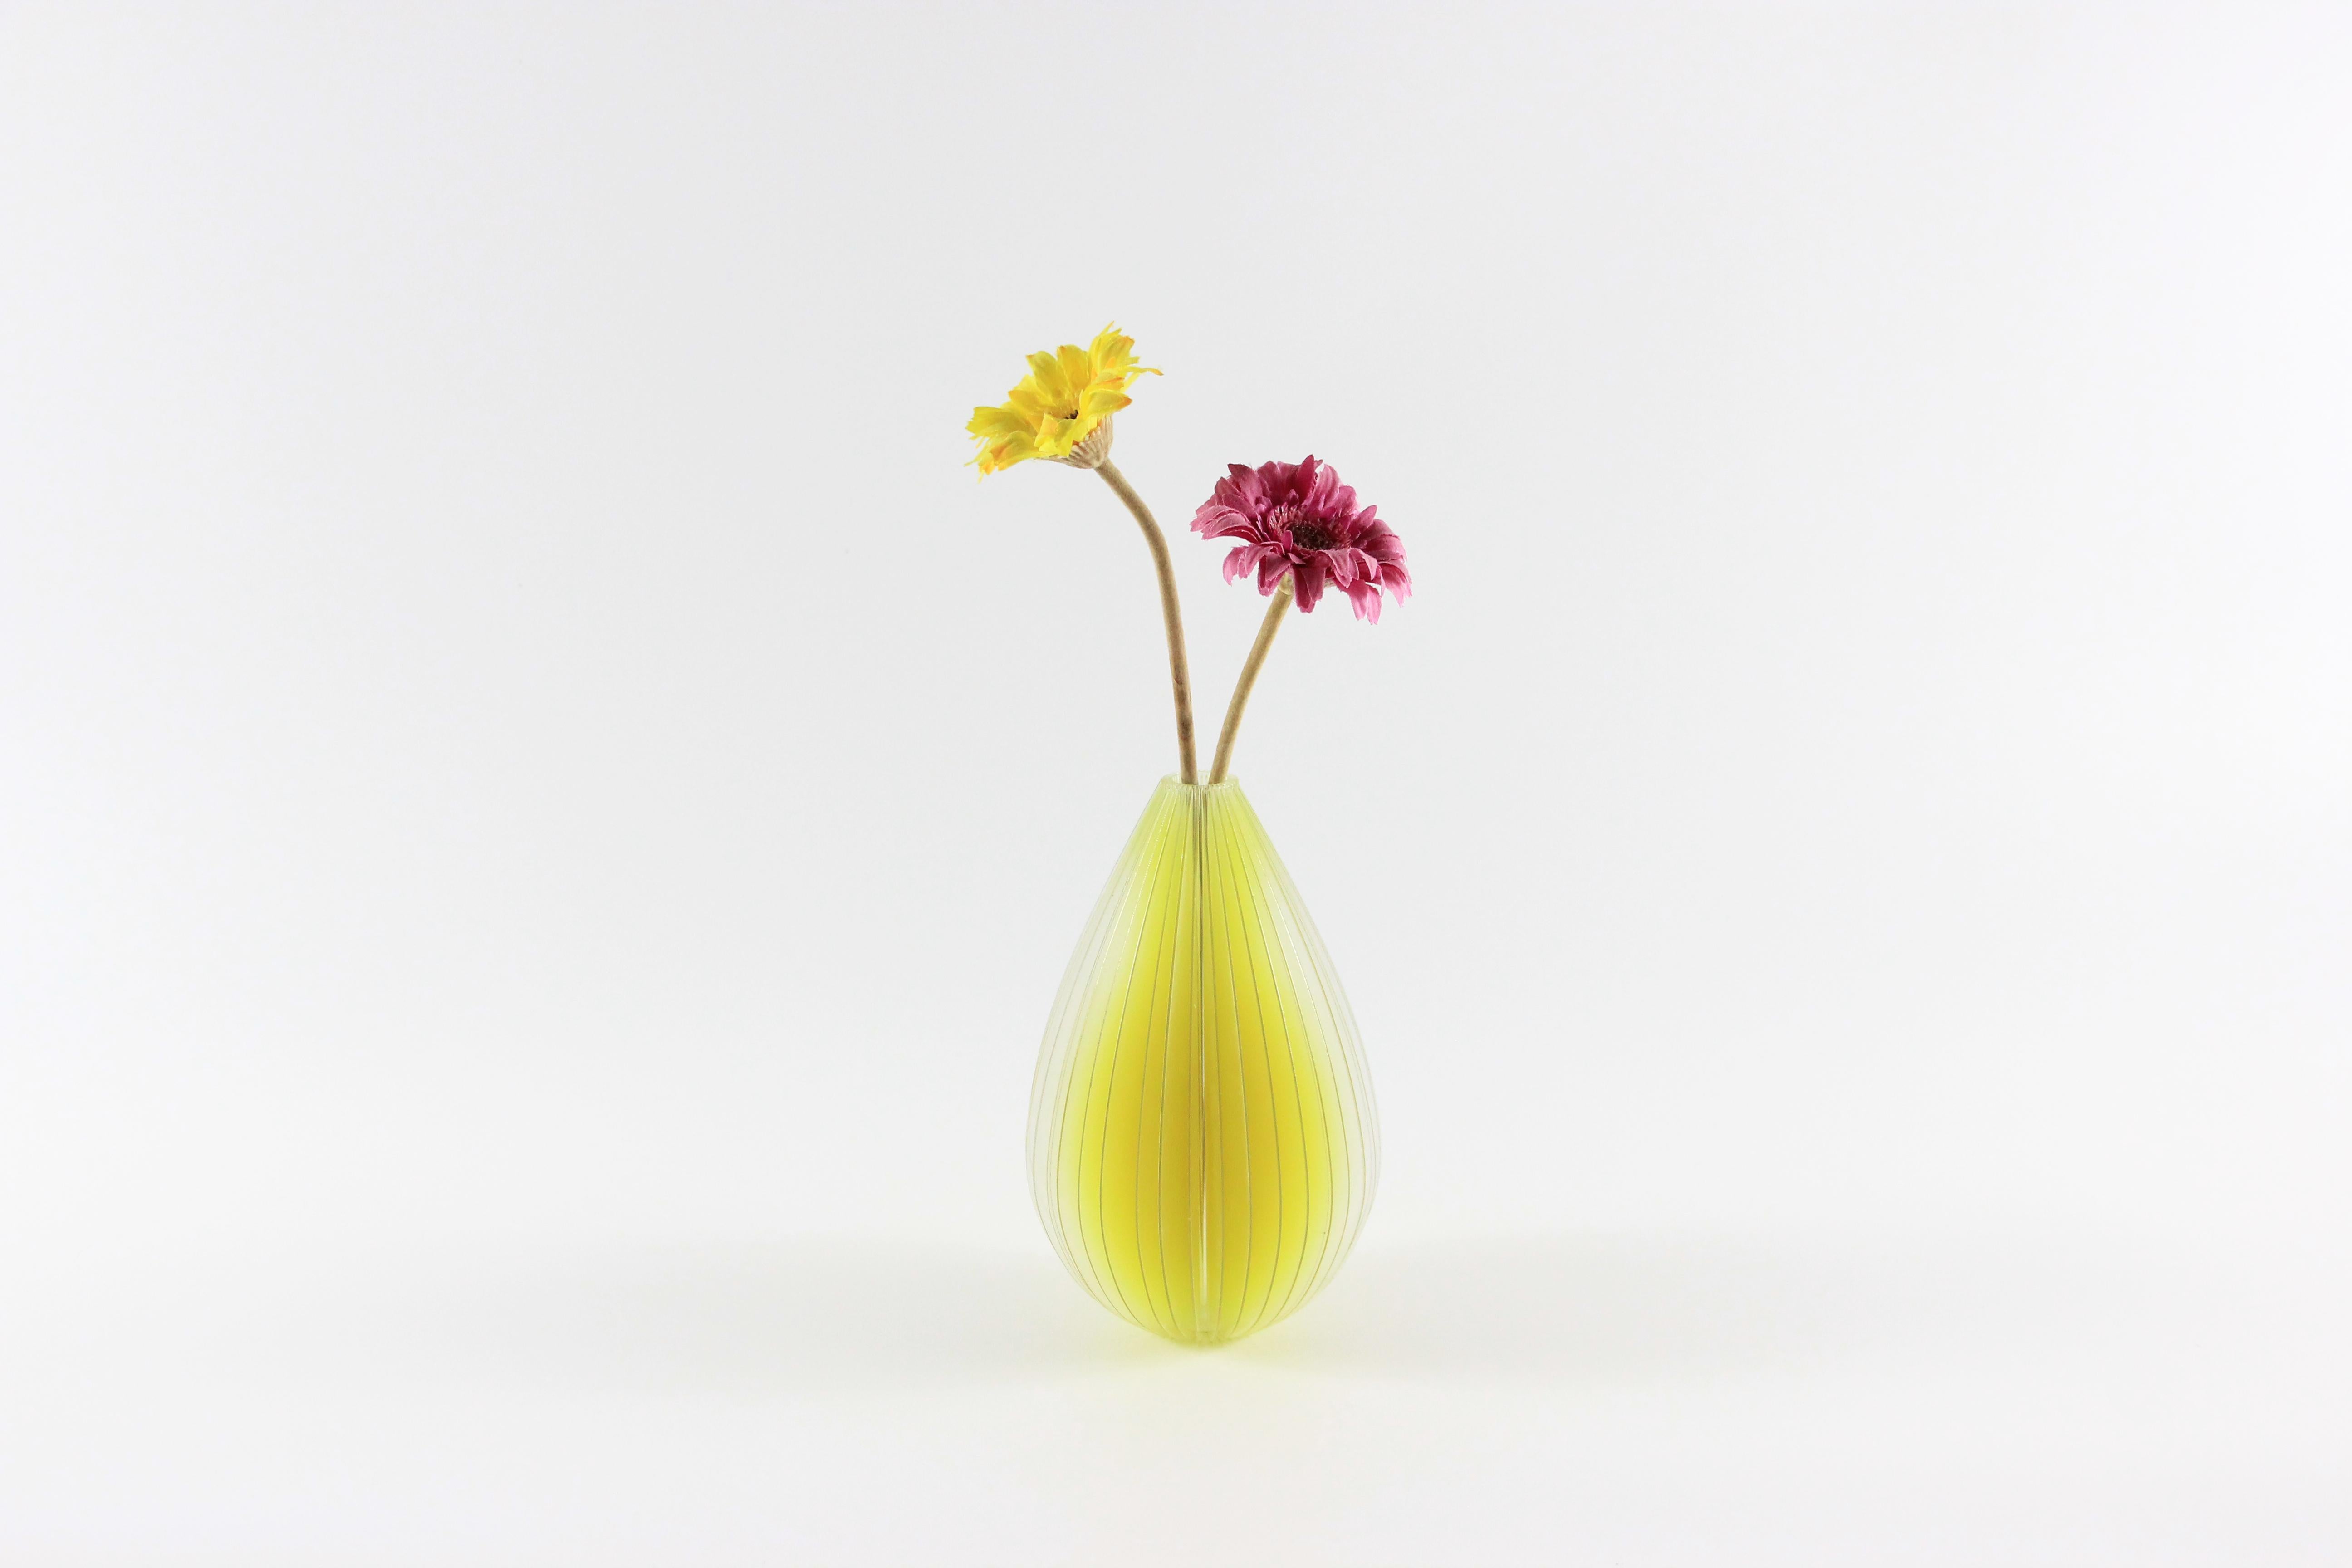 Lightness vase is inspired by an accidental scene. When light is projected into the space which is layered , the wonderful imagination is beginning. The vases feature gradations of colors that optically change depending on the light hitting them,as